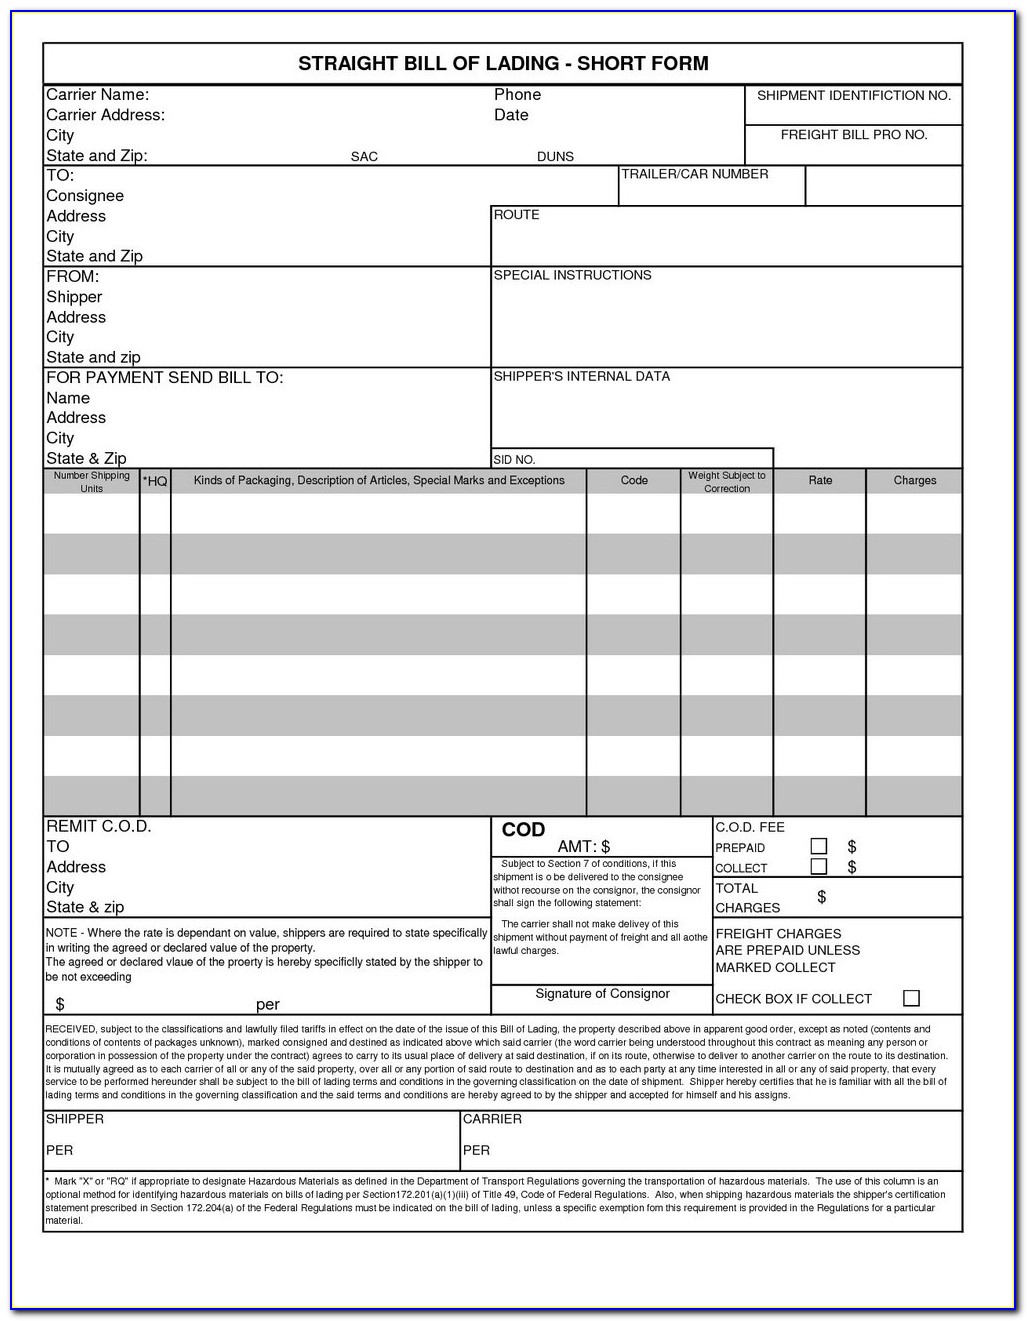 Bill Of Lading Form How To Fill Out